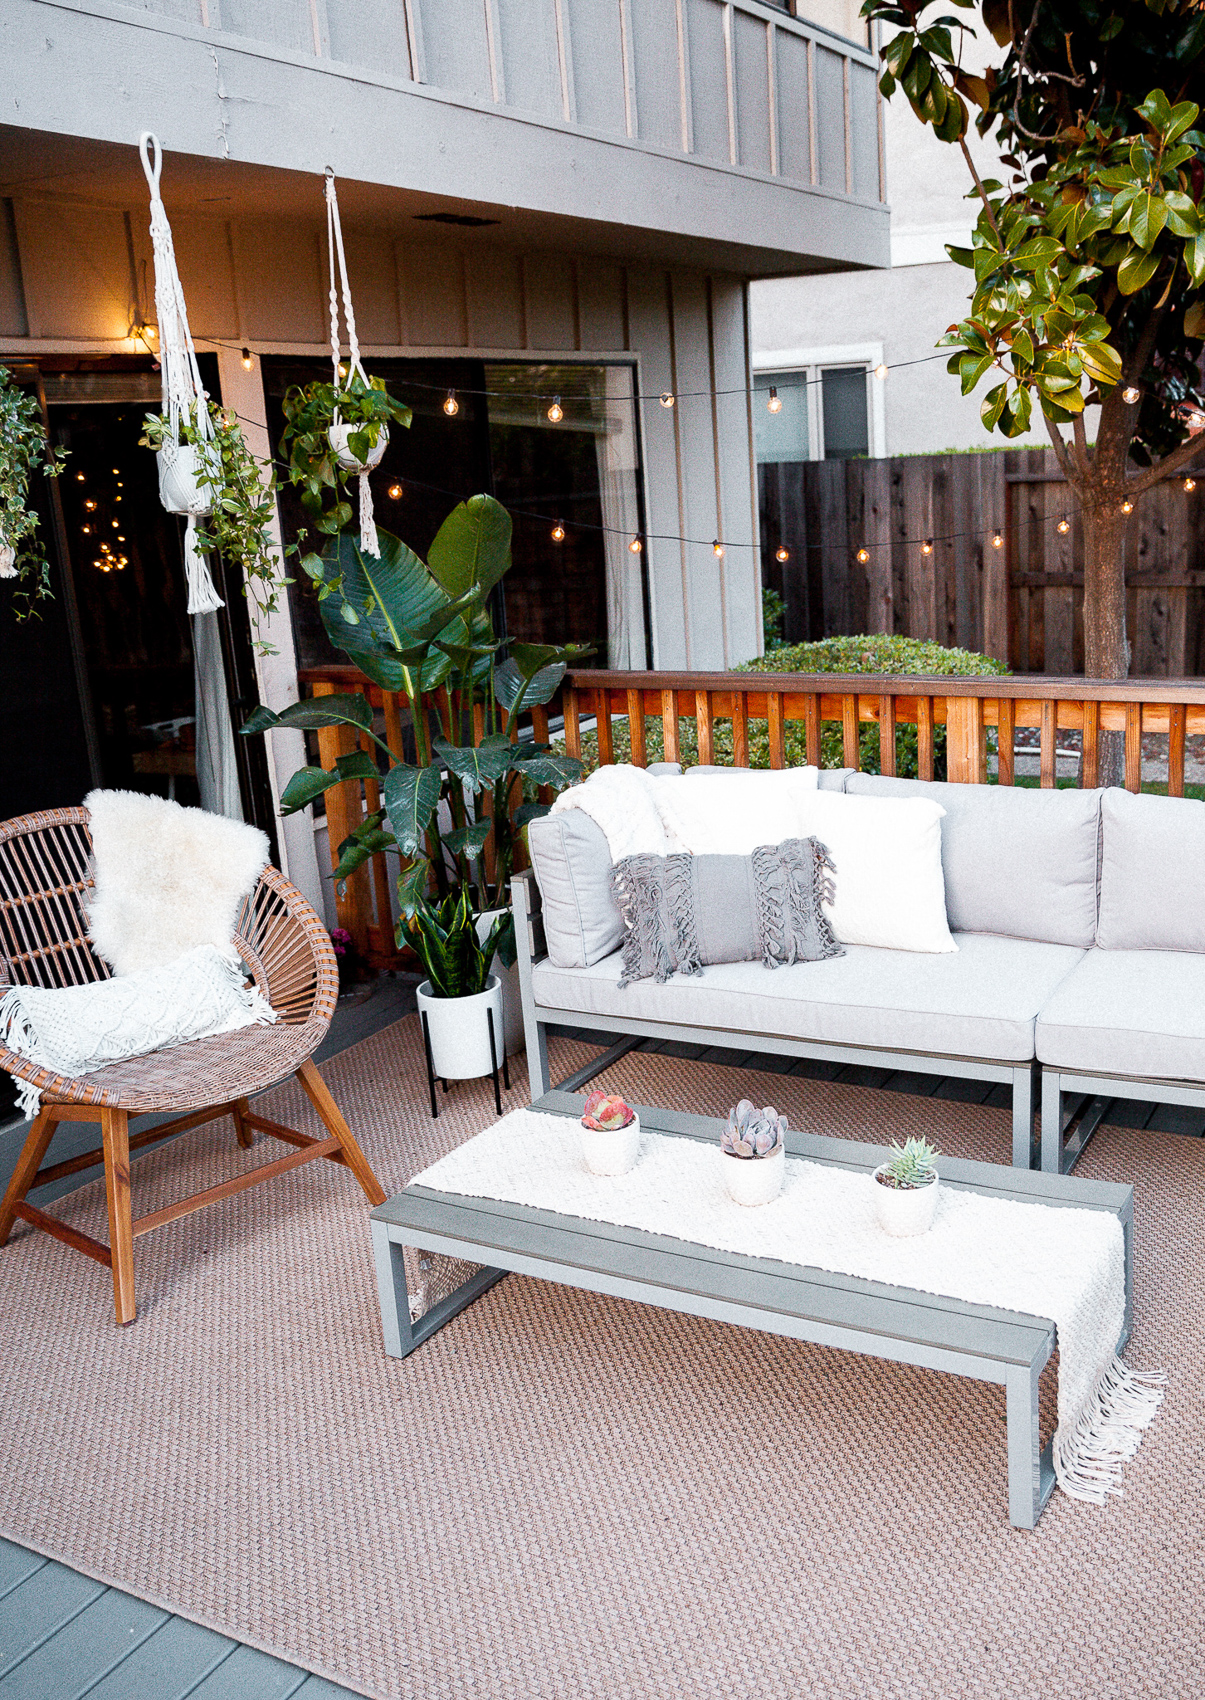 dos and dont's for backyard patio furniture and decor. www.thegirlintheyellowdress.com